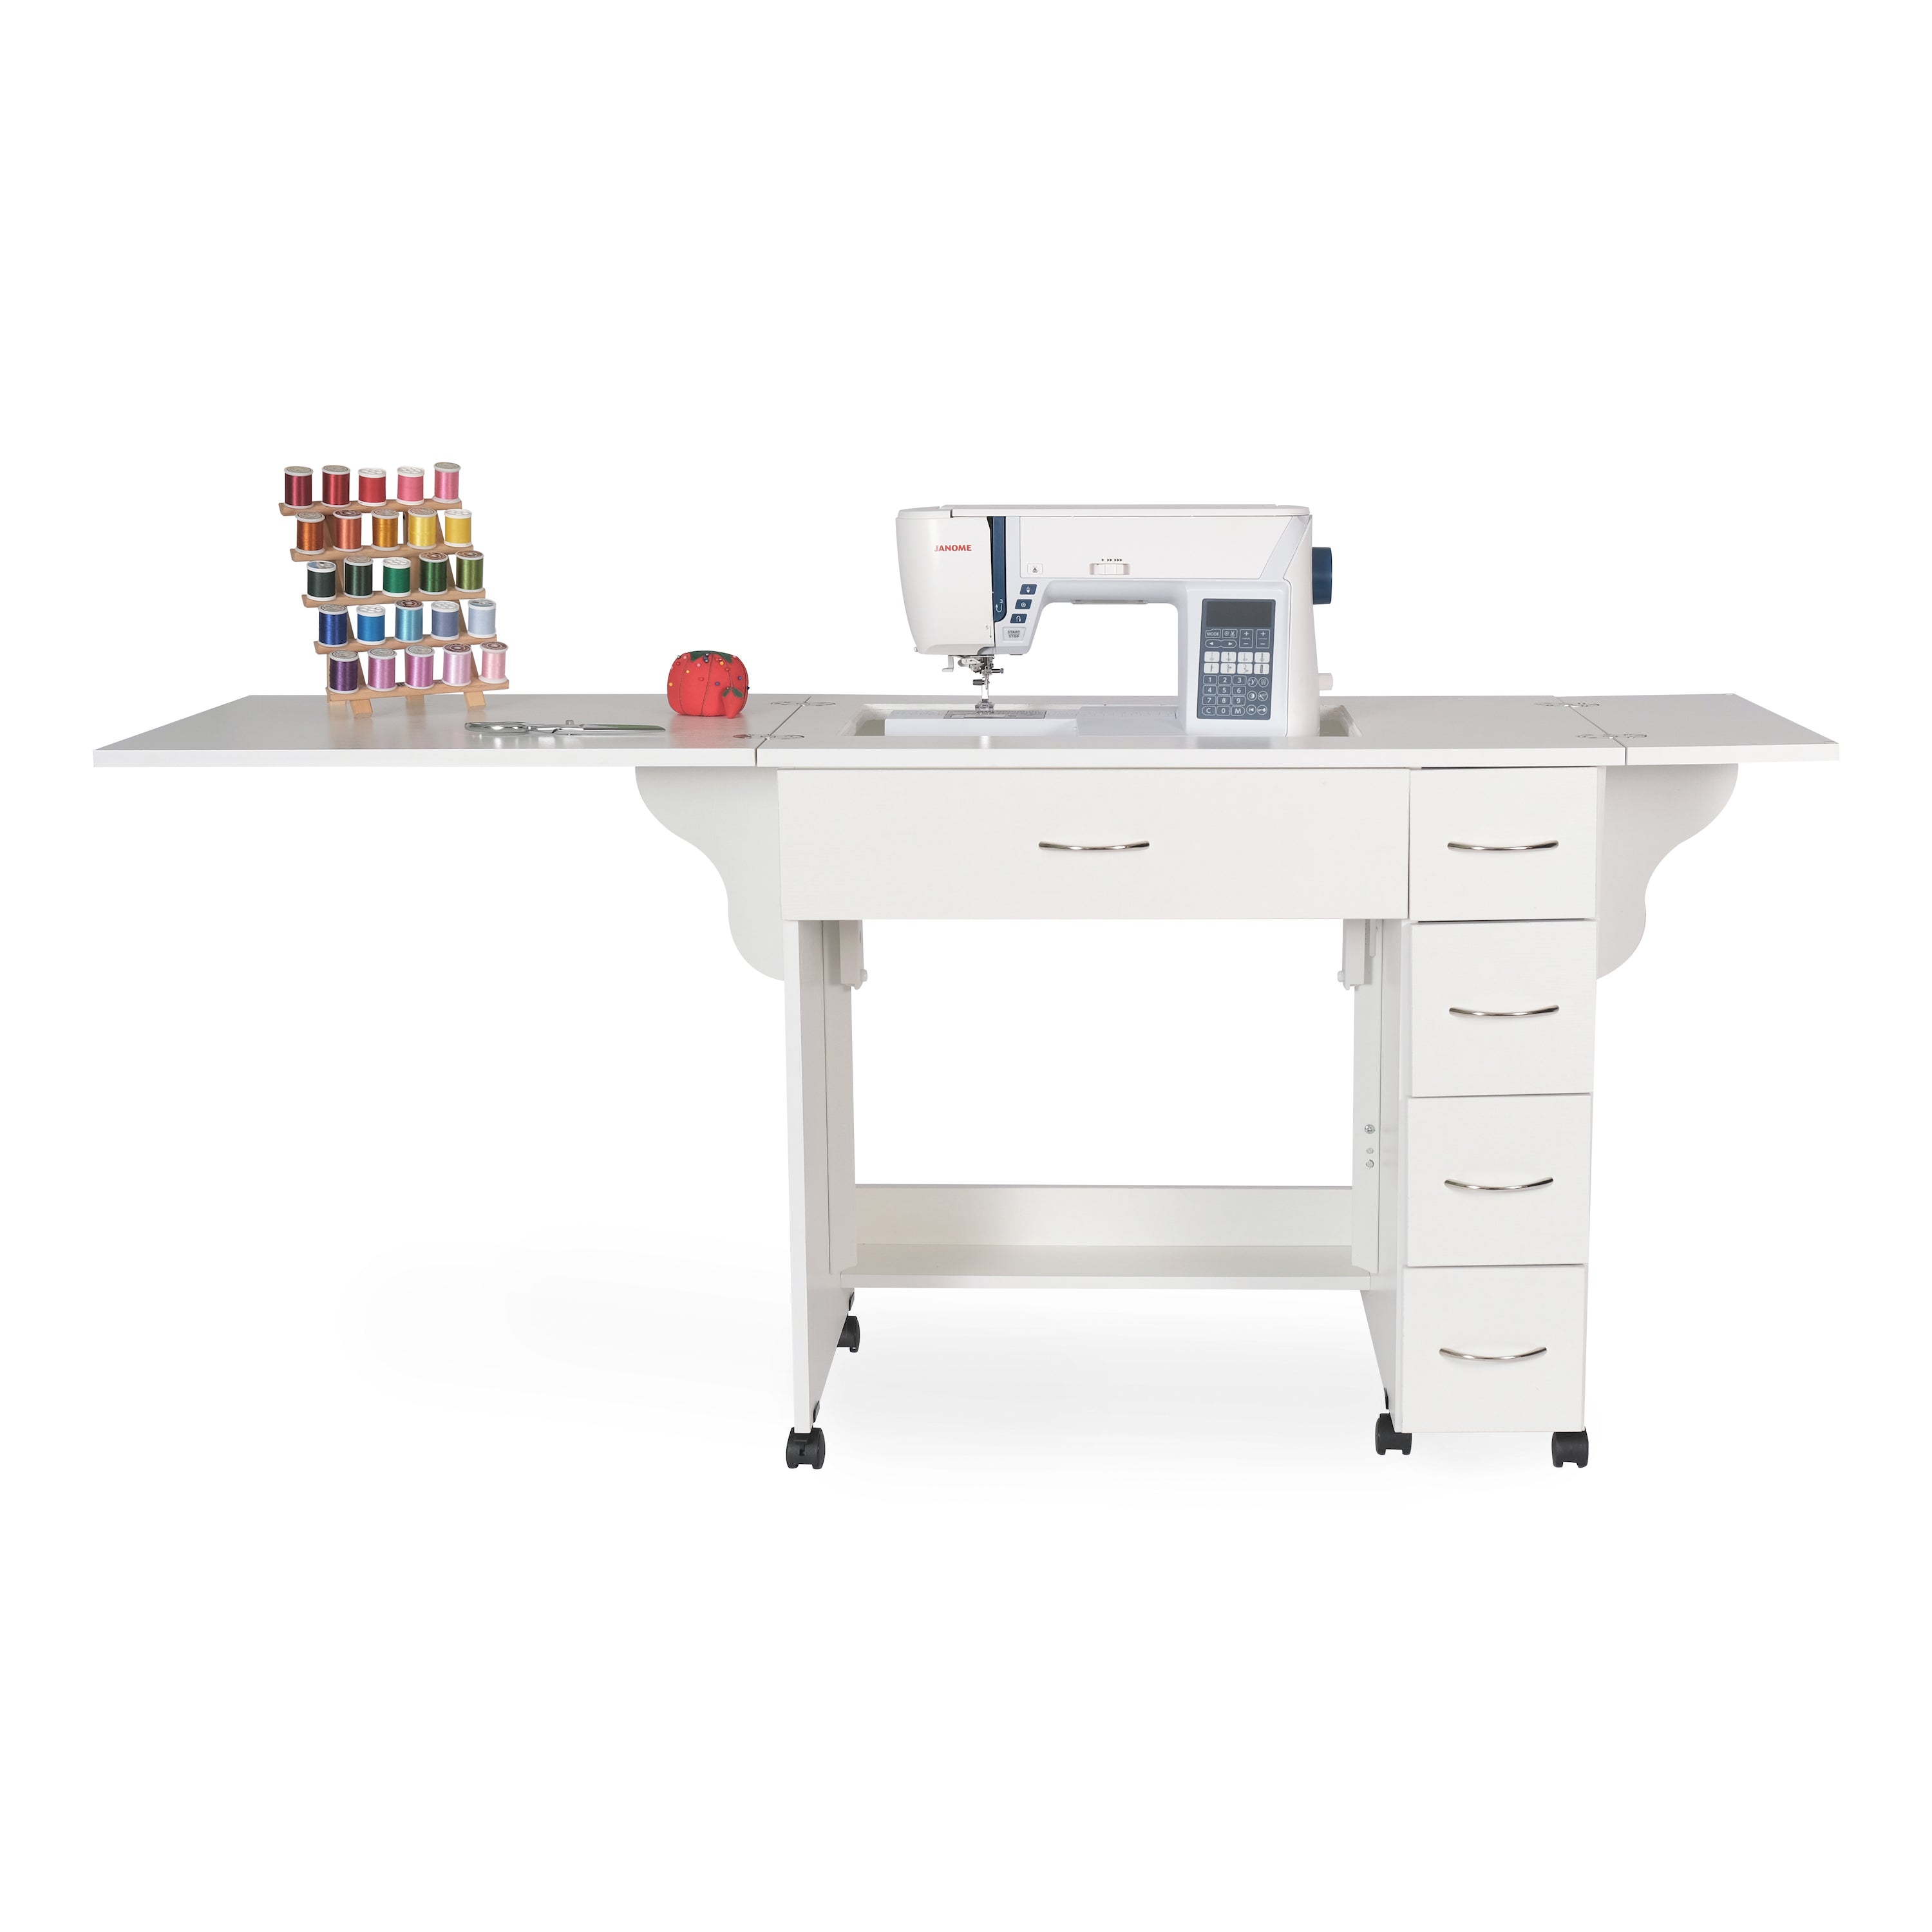 Alice Sewing Cabinet - White